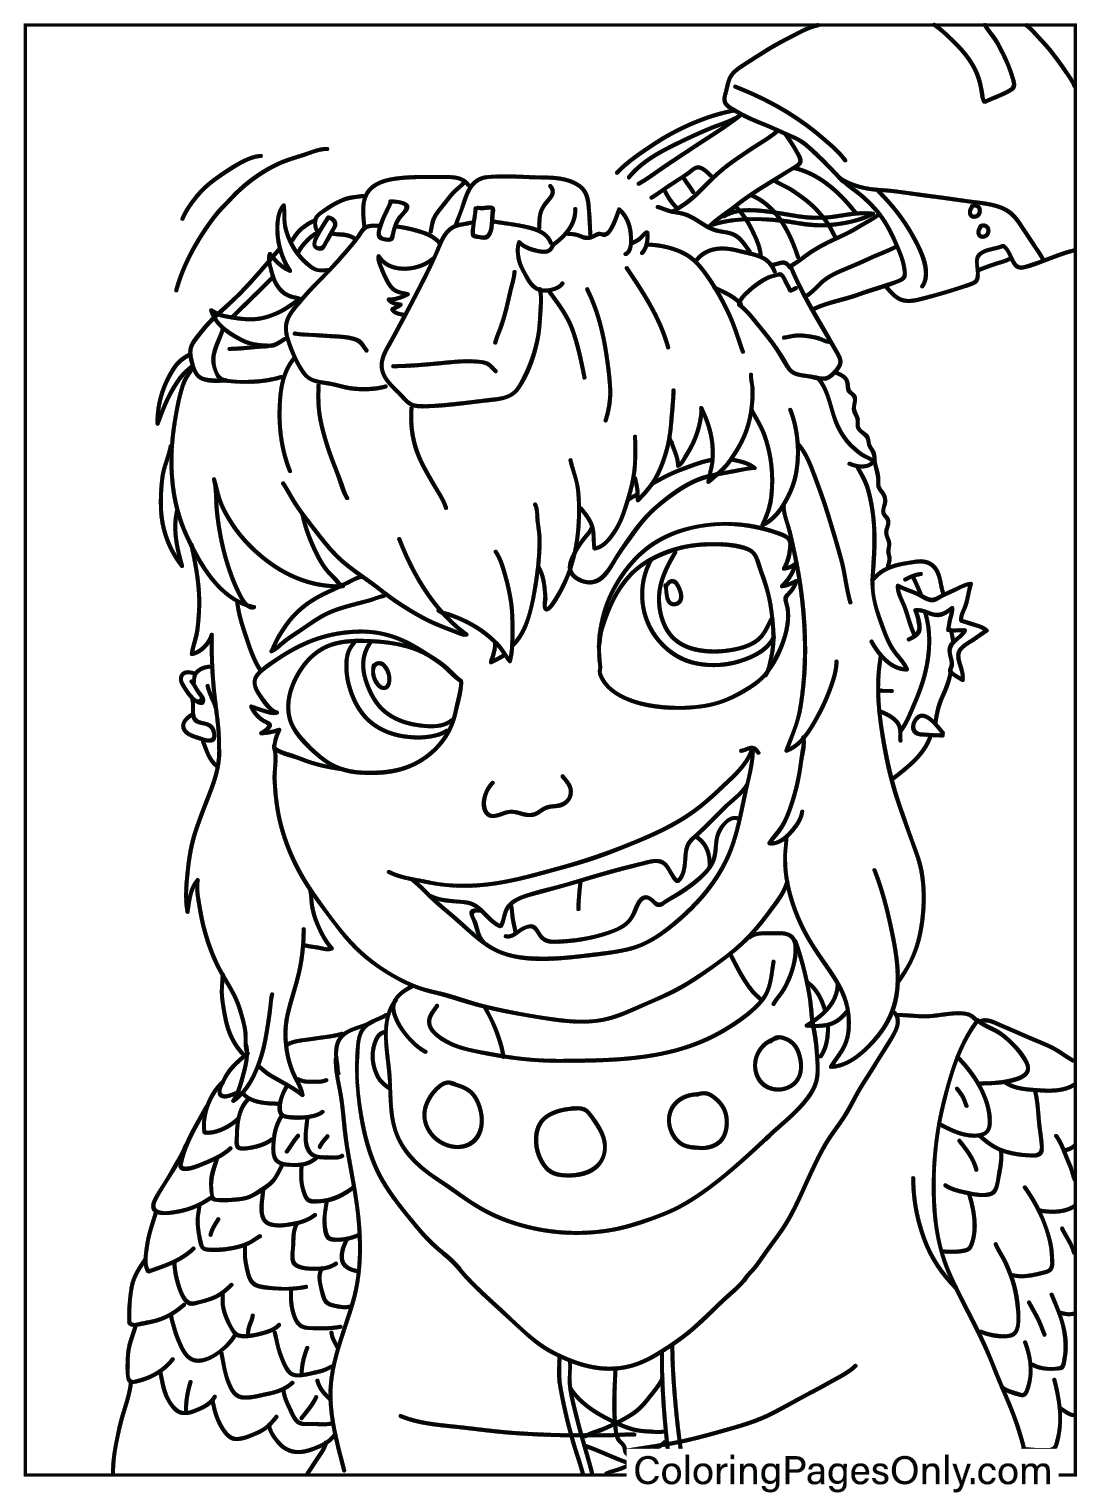 Images Nimona Coloring Page from Nimona